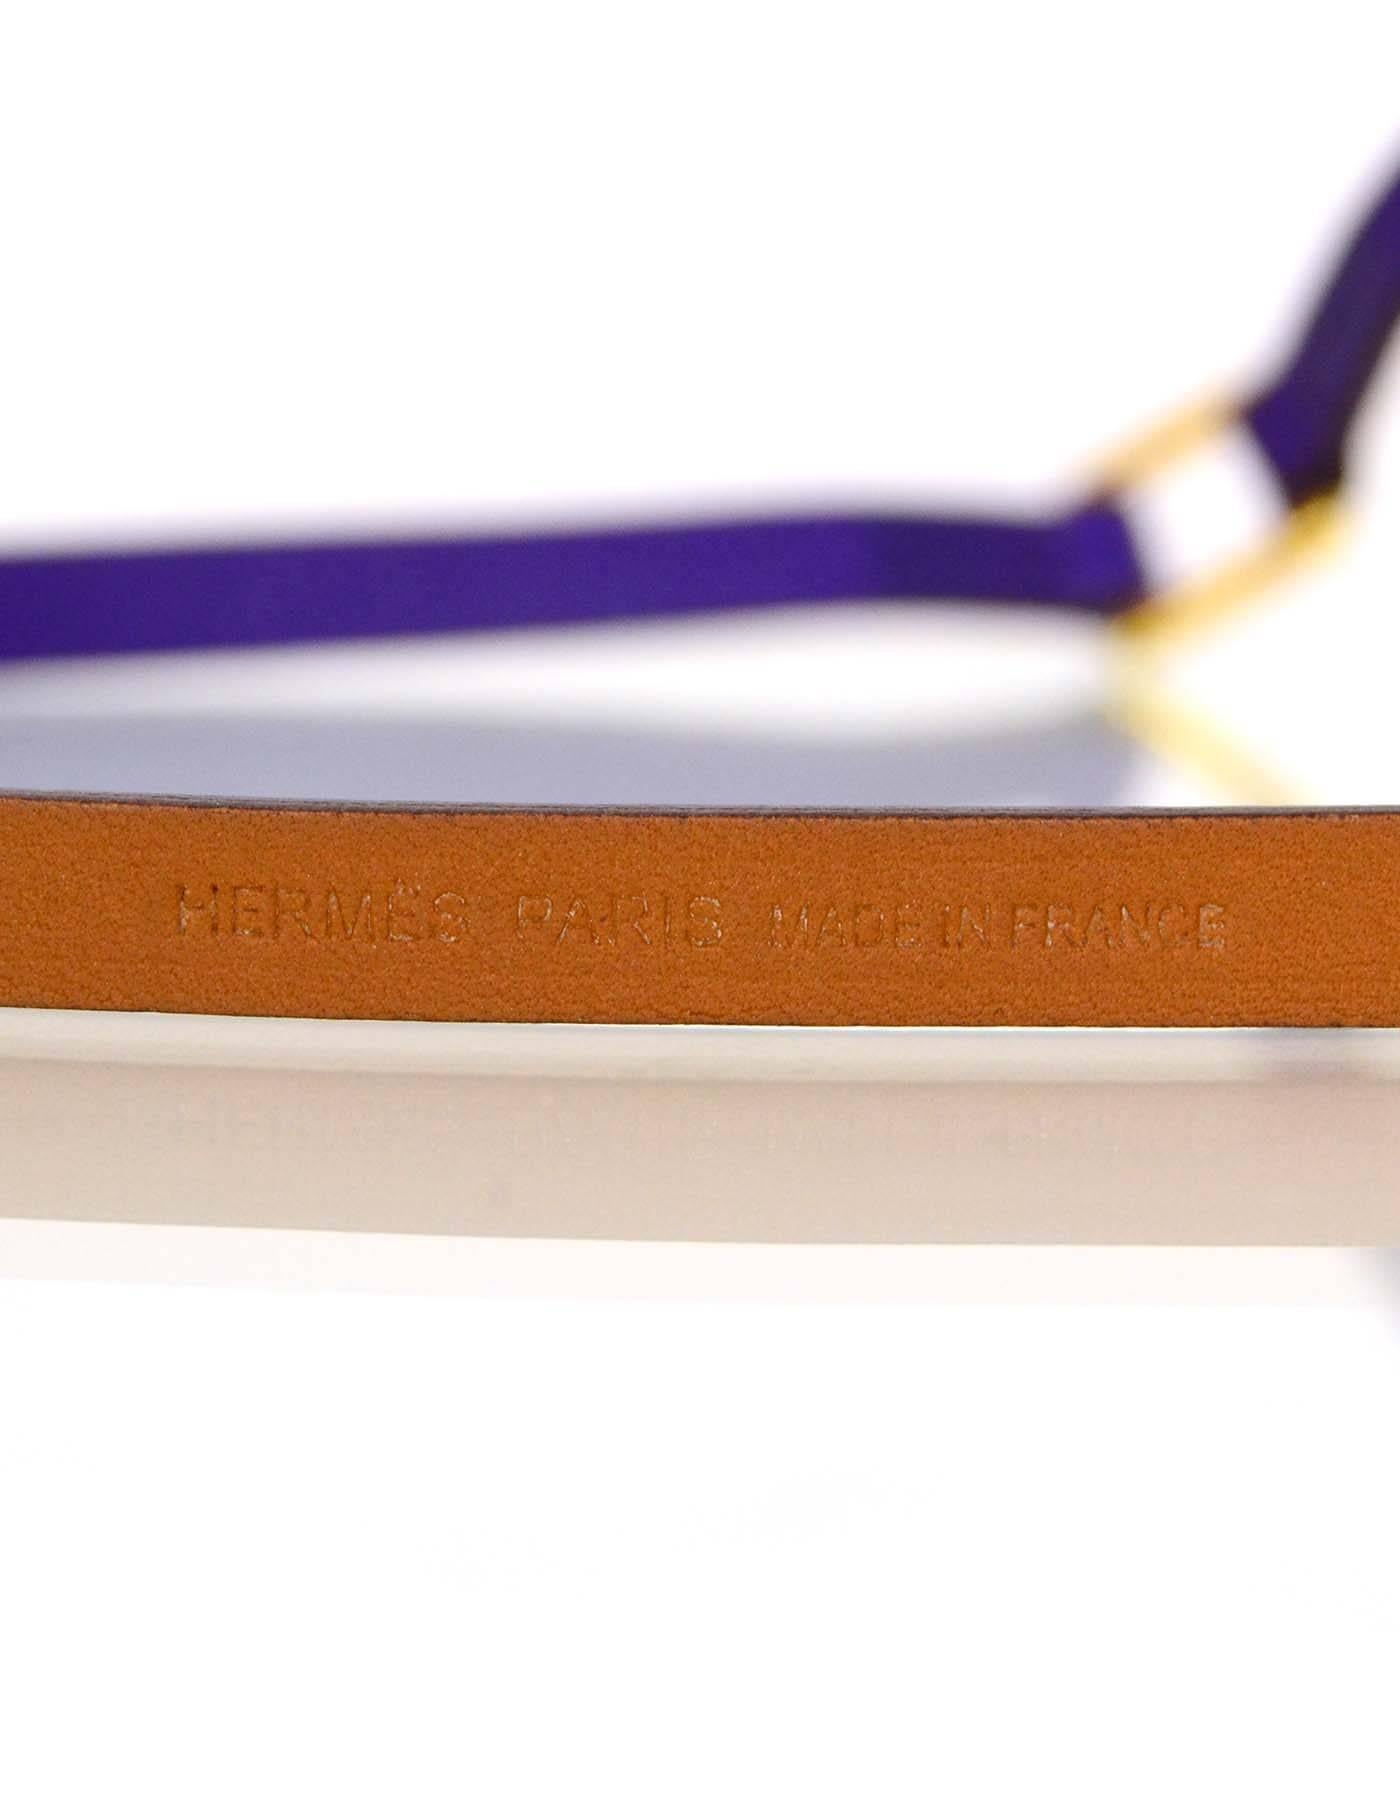 100% Authentic Hermes Purple Iris Epsom Leather Dandy Pavane Quadruple Wrap Bracelet sz S. Featuring classic Hermes goldtone horsebit, this bracelet can also be worn doubled as a choker necklace.

Made In: France
Year of Production: 2012
Color: